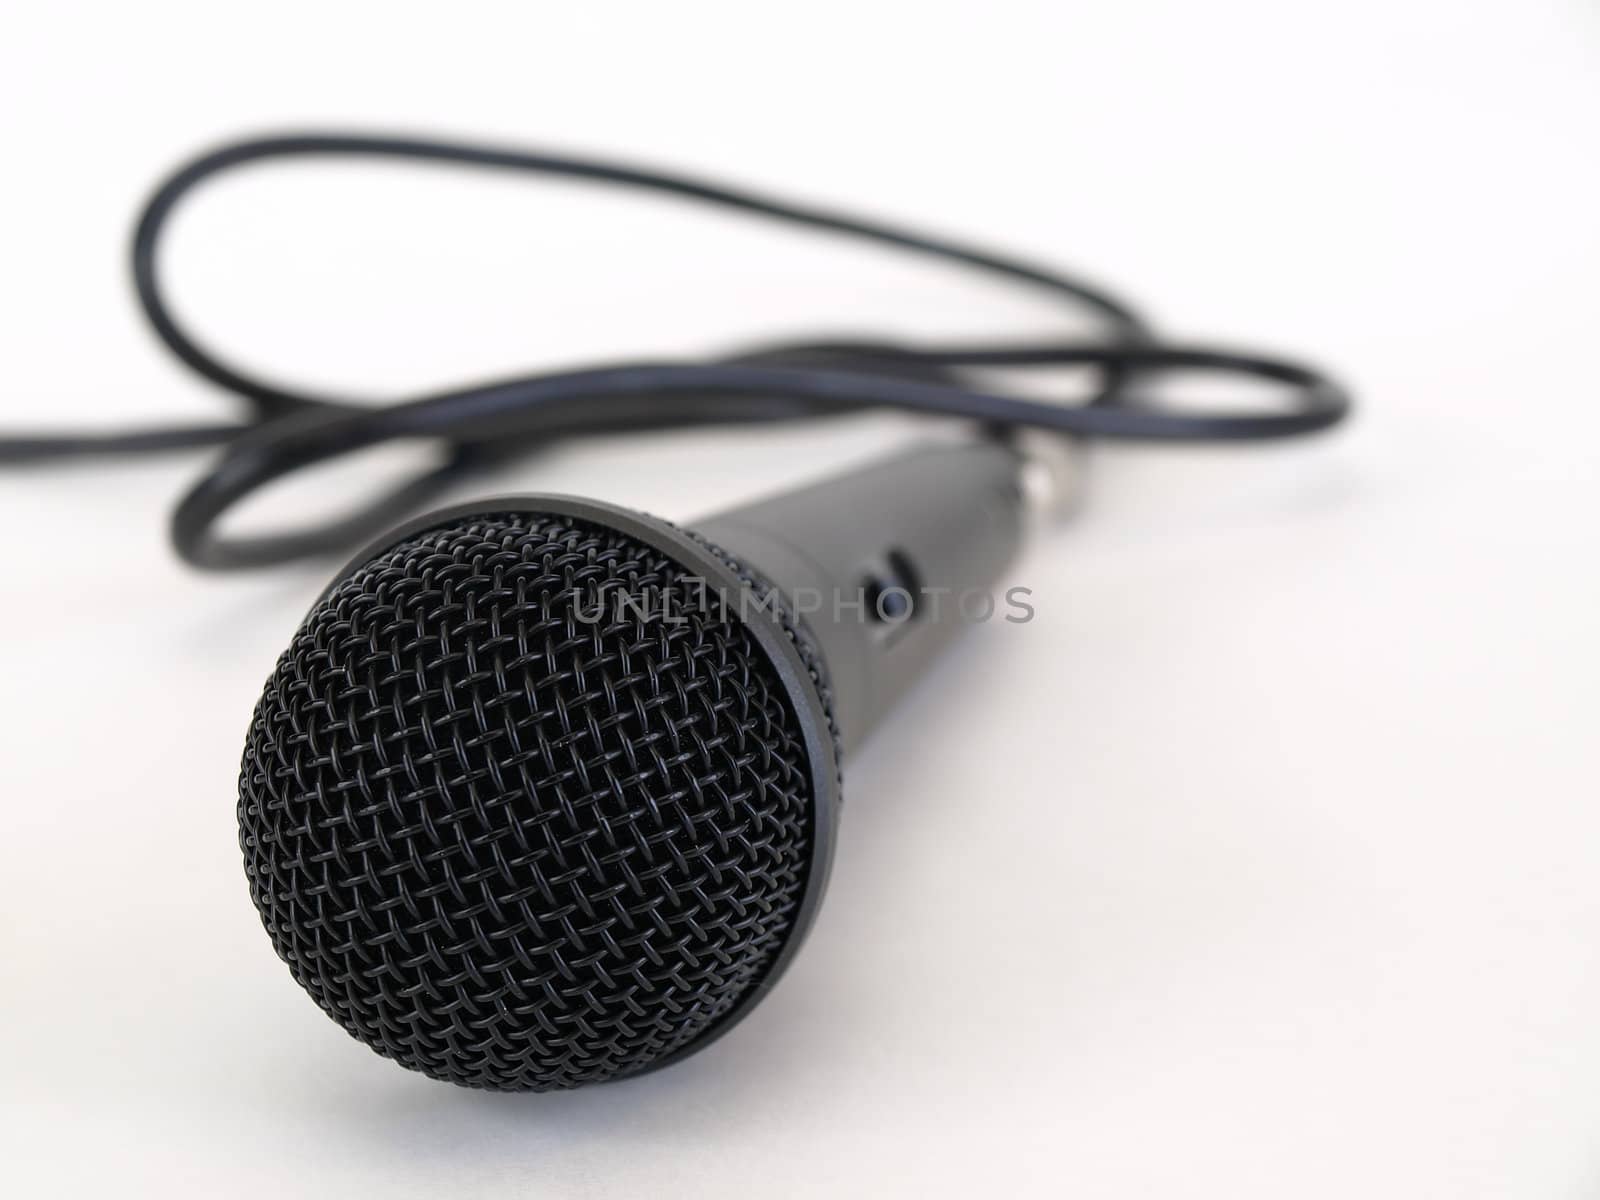 Studio microphone isolated on a white background with cord trailing off to the side.